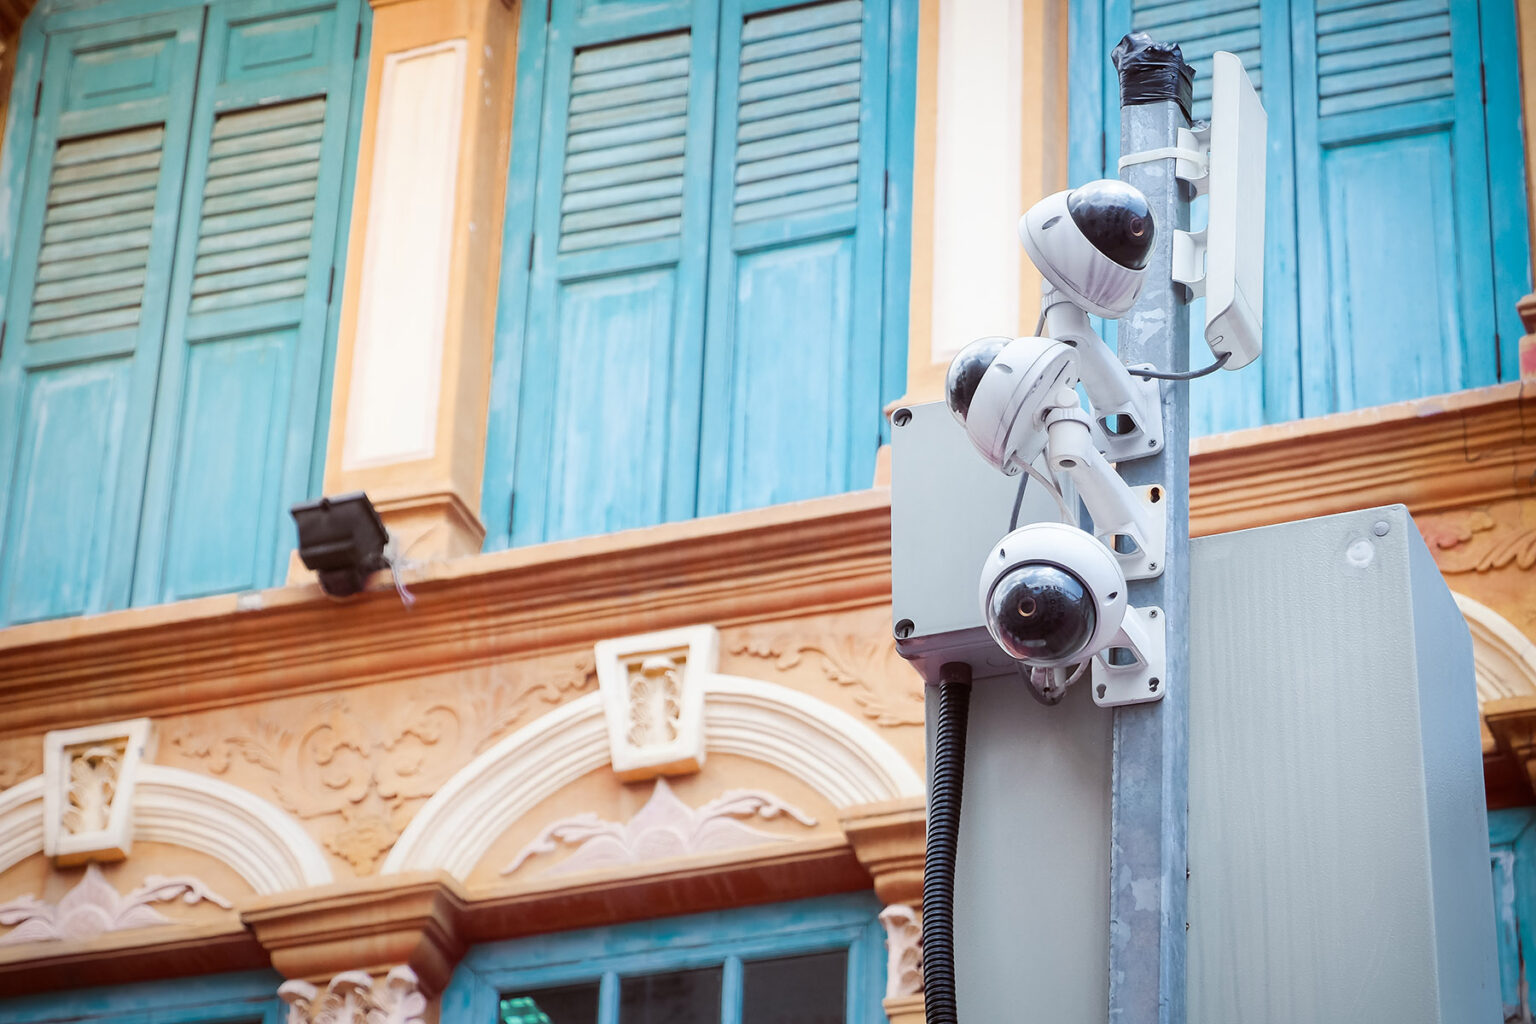 CCTV camera security in Singapore, with brightly colored buildings in the background.